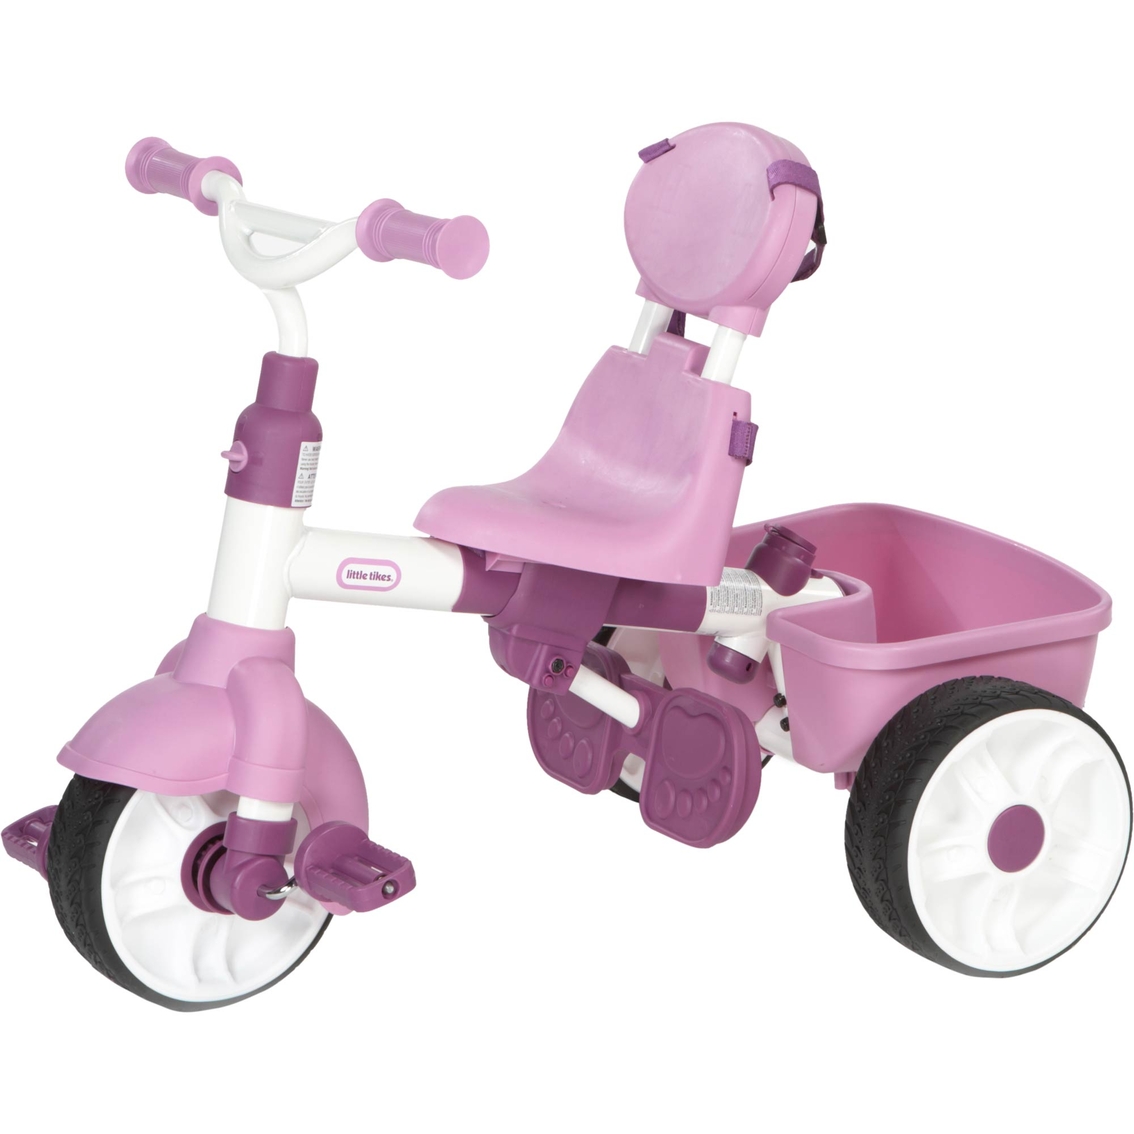 Little Tikes 4-in-1 Basic Edition Trike, Pink - Image 4 of 4